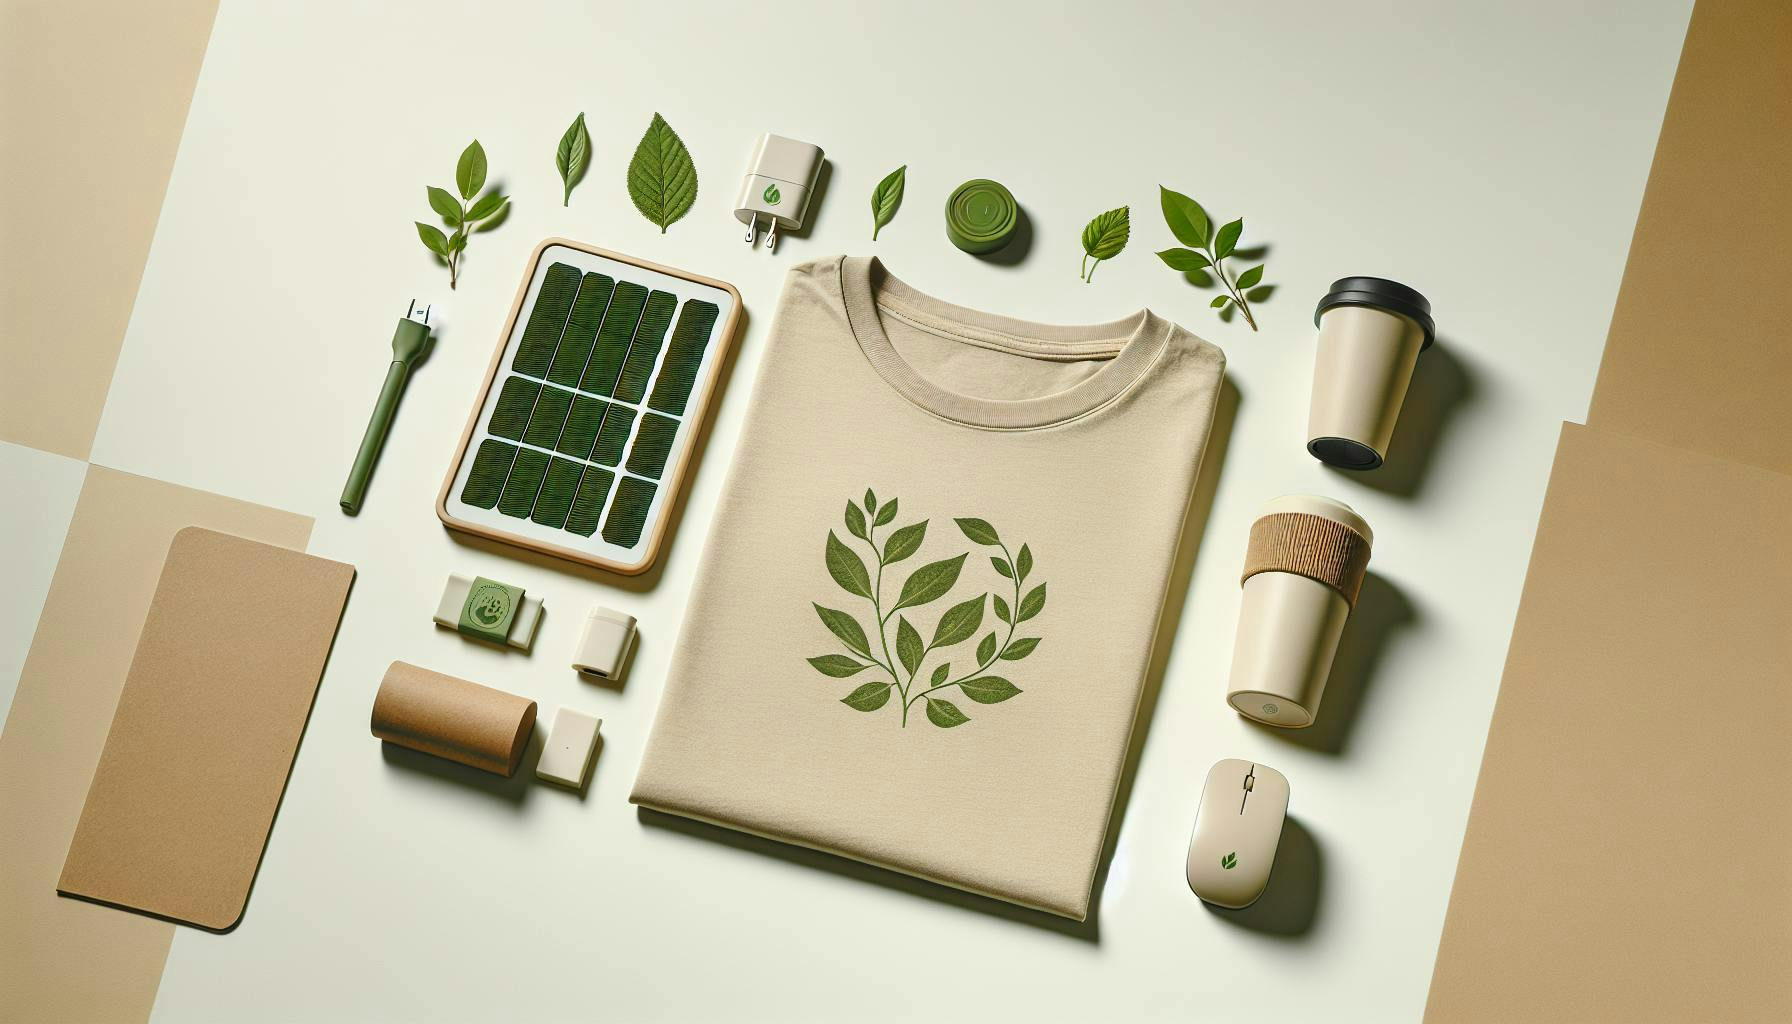 Cool Branded Merchandise Ideas for Eco-Friendly Campaigns